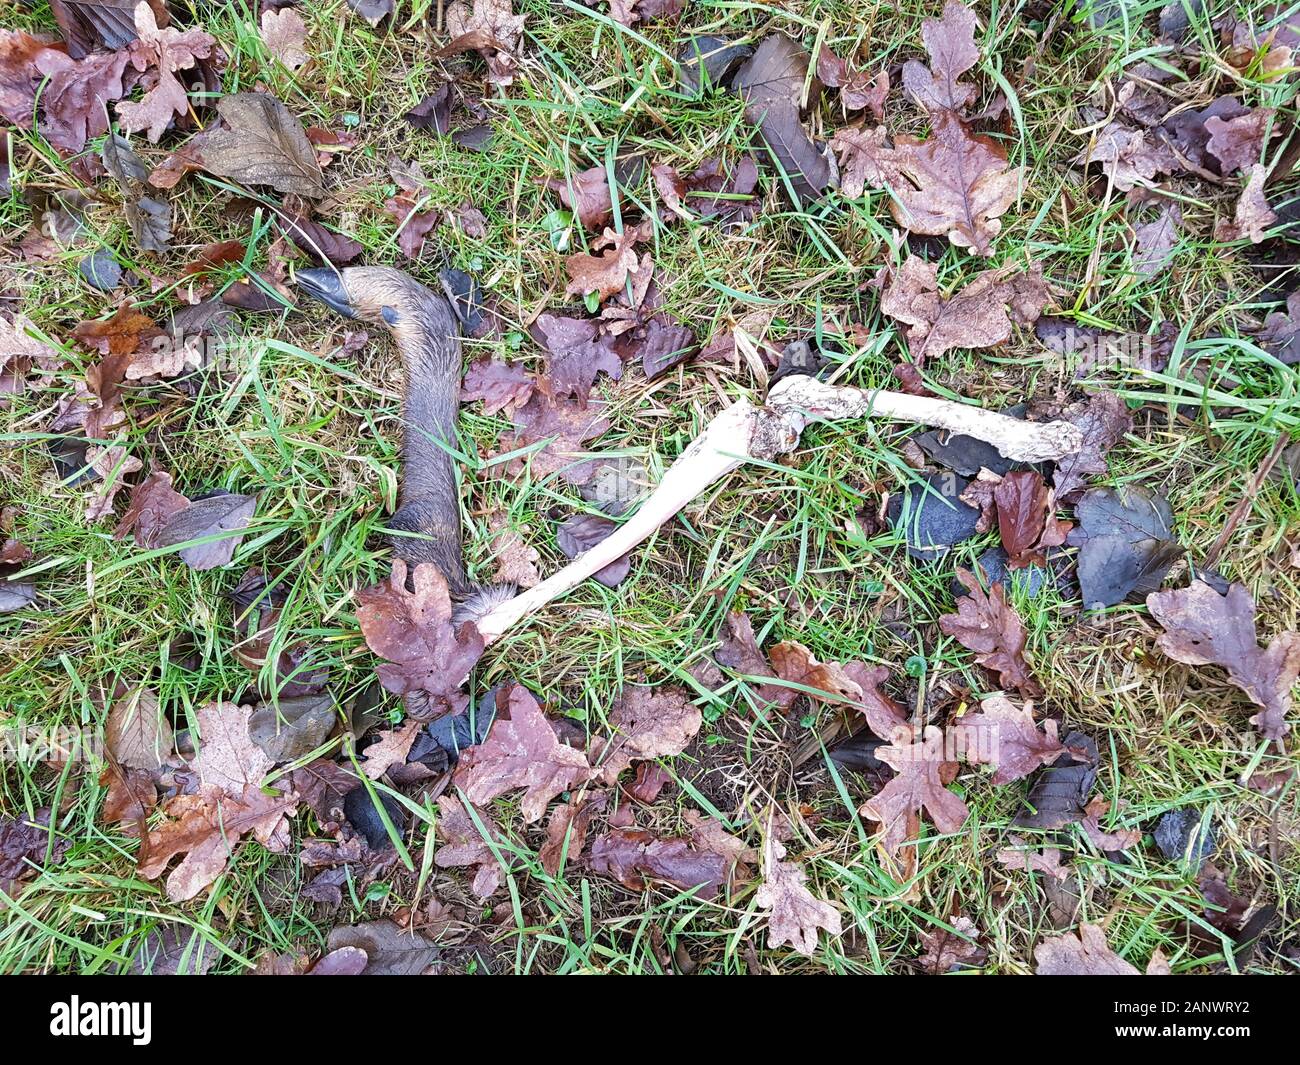 Skeleton of a European deer, probably hunted and eaten by a wolf Stock Photo